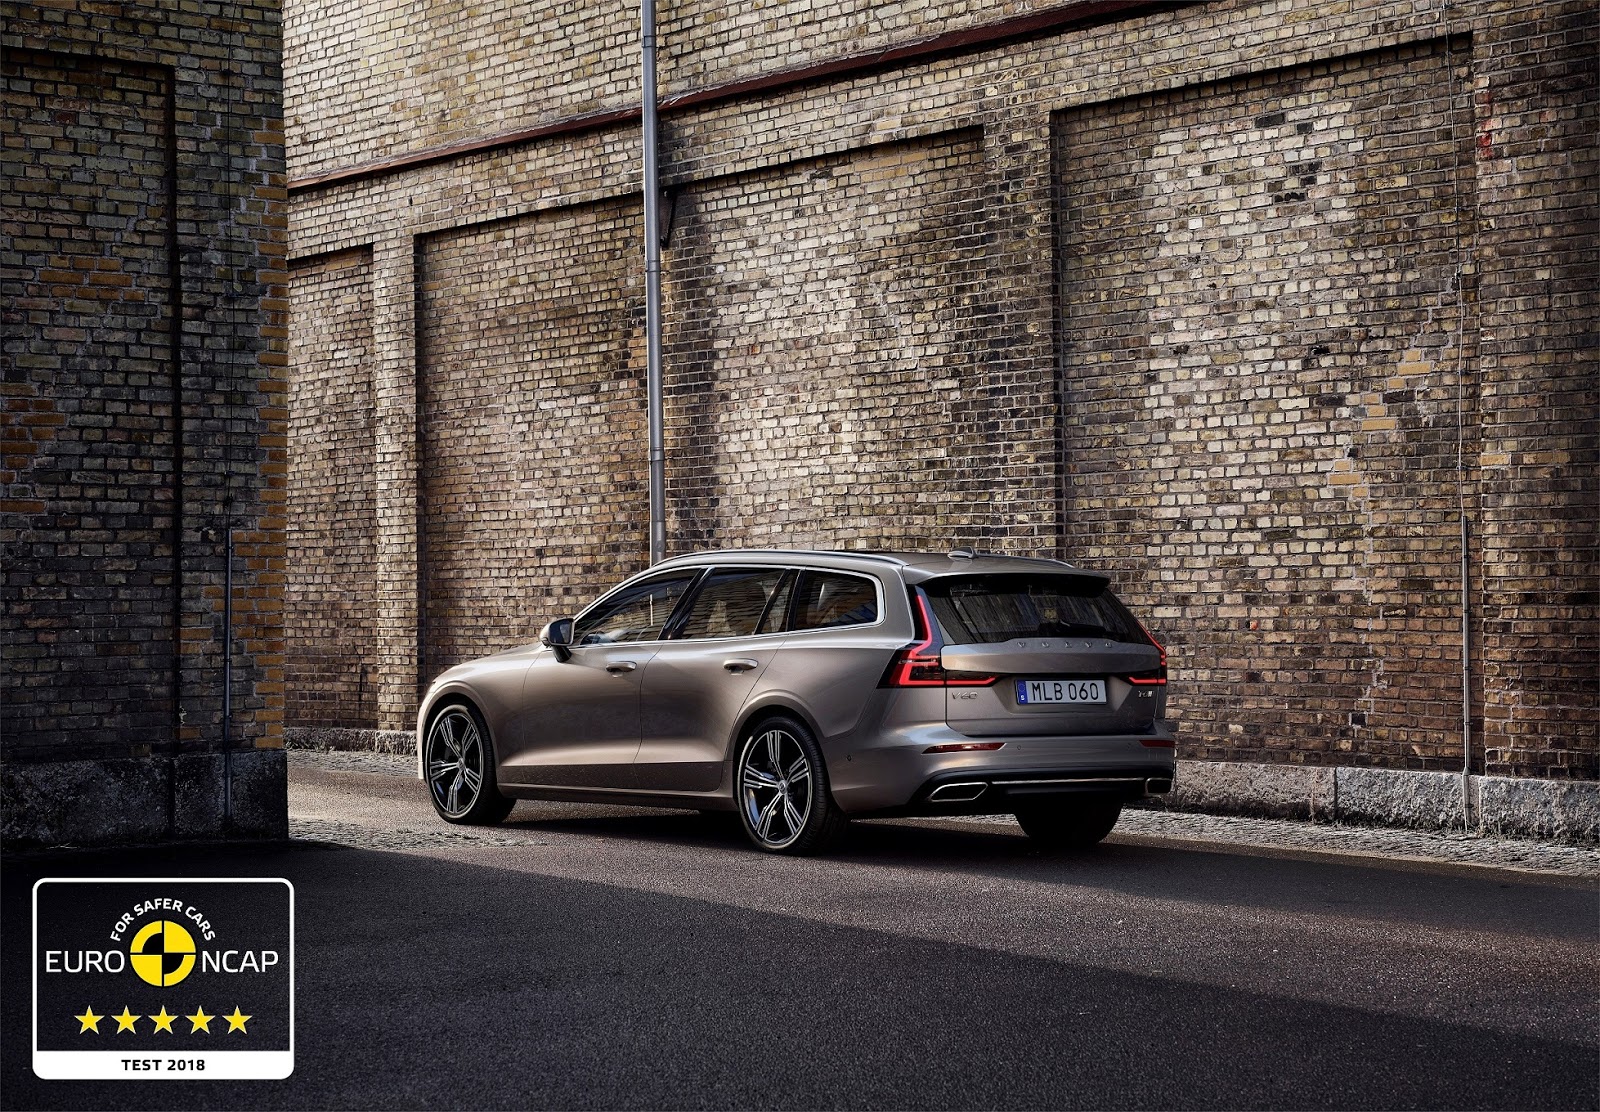 246535 Volvo S60 and V60 secure 5 star safety rating by Euro NCAP1 Συνεχίζουν το σερί 5 αστέρων τα Volvo S60 και V60